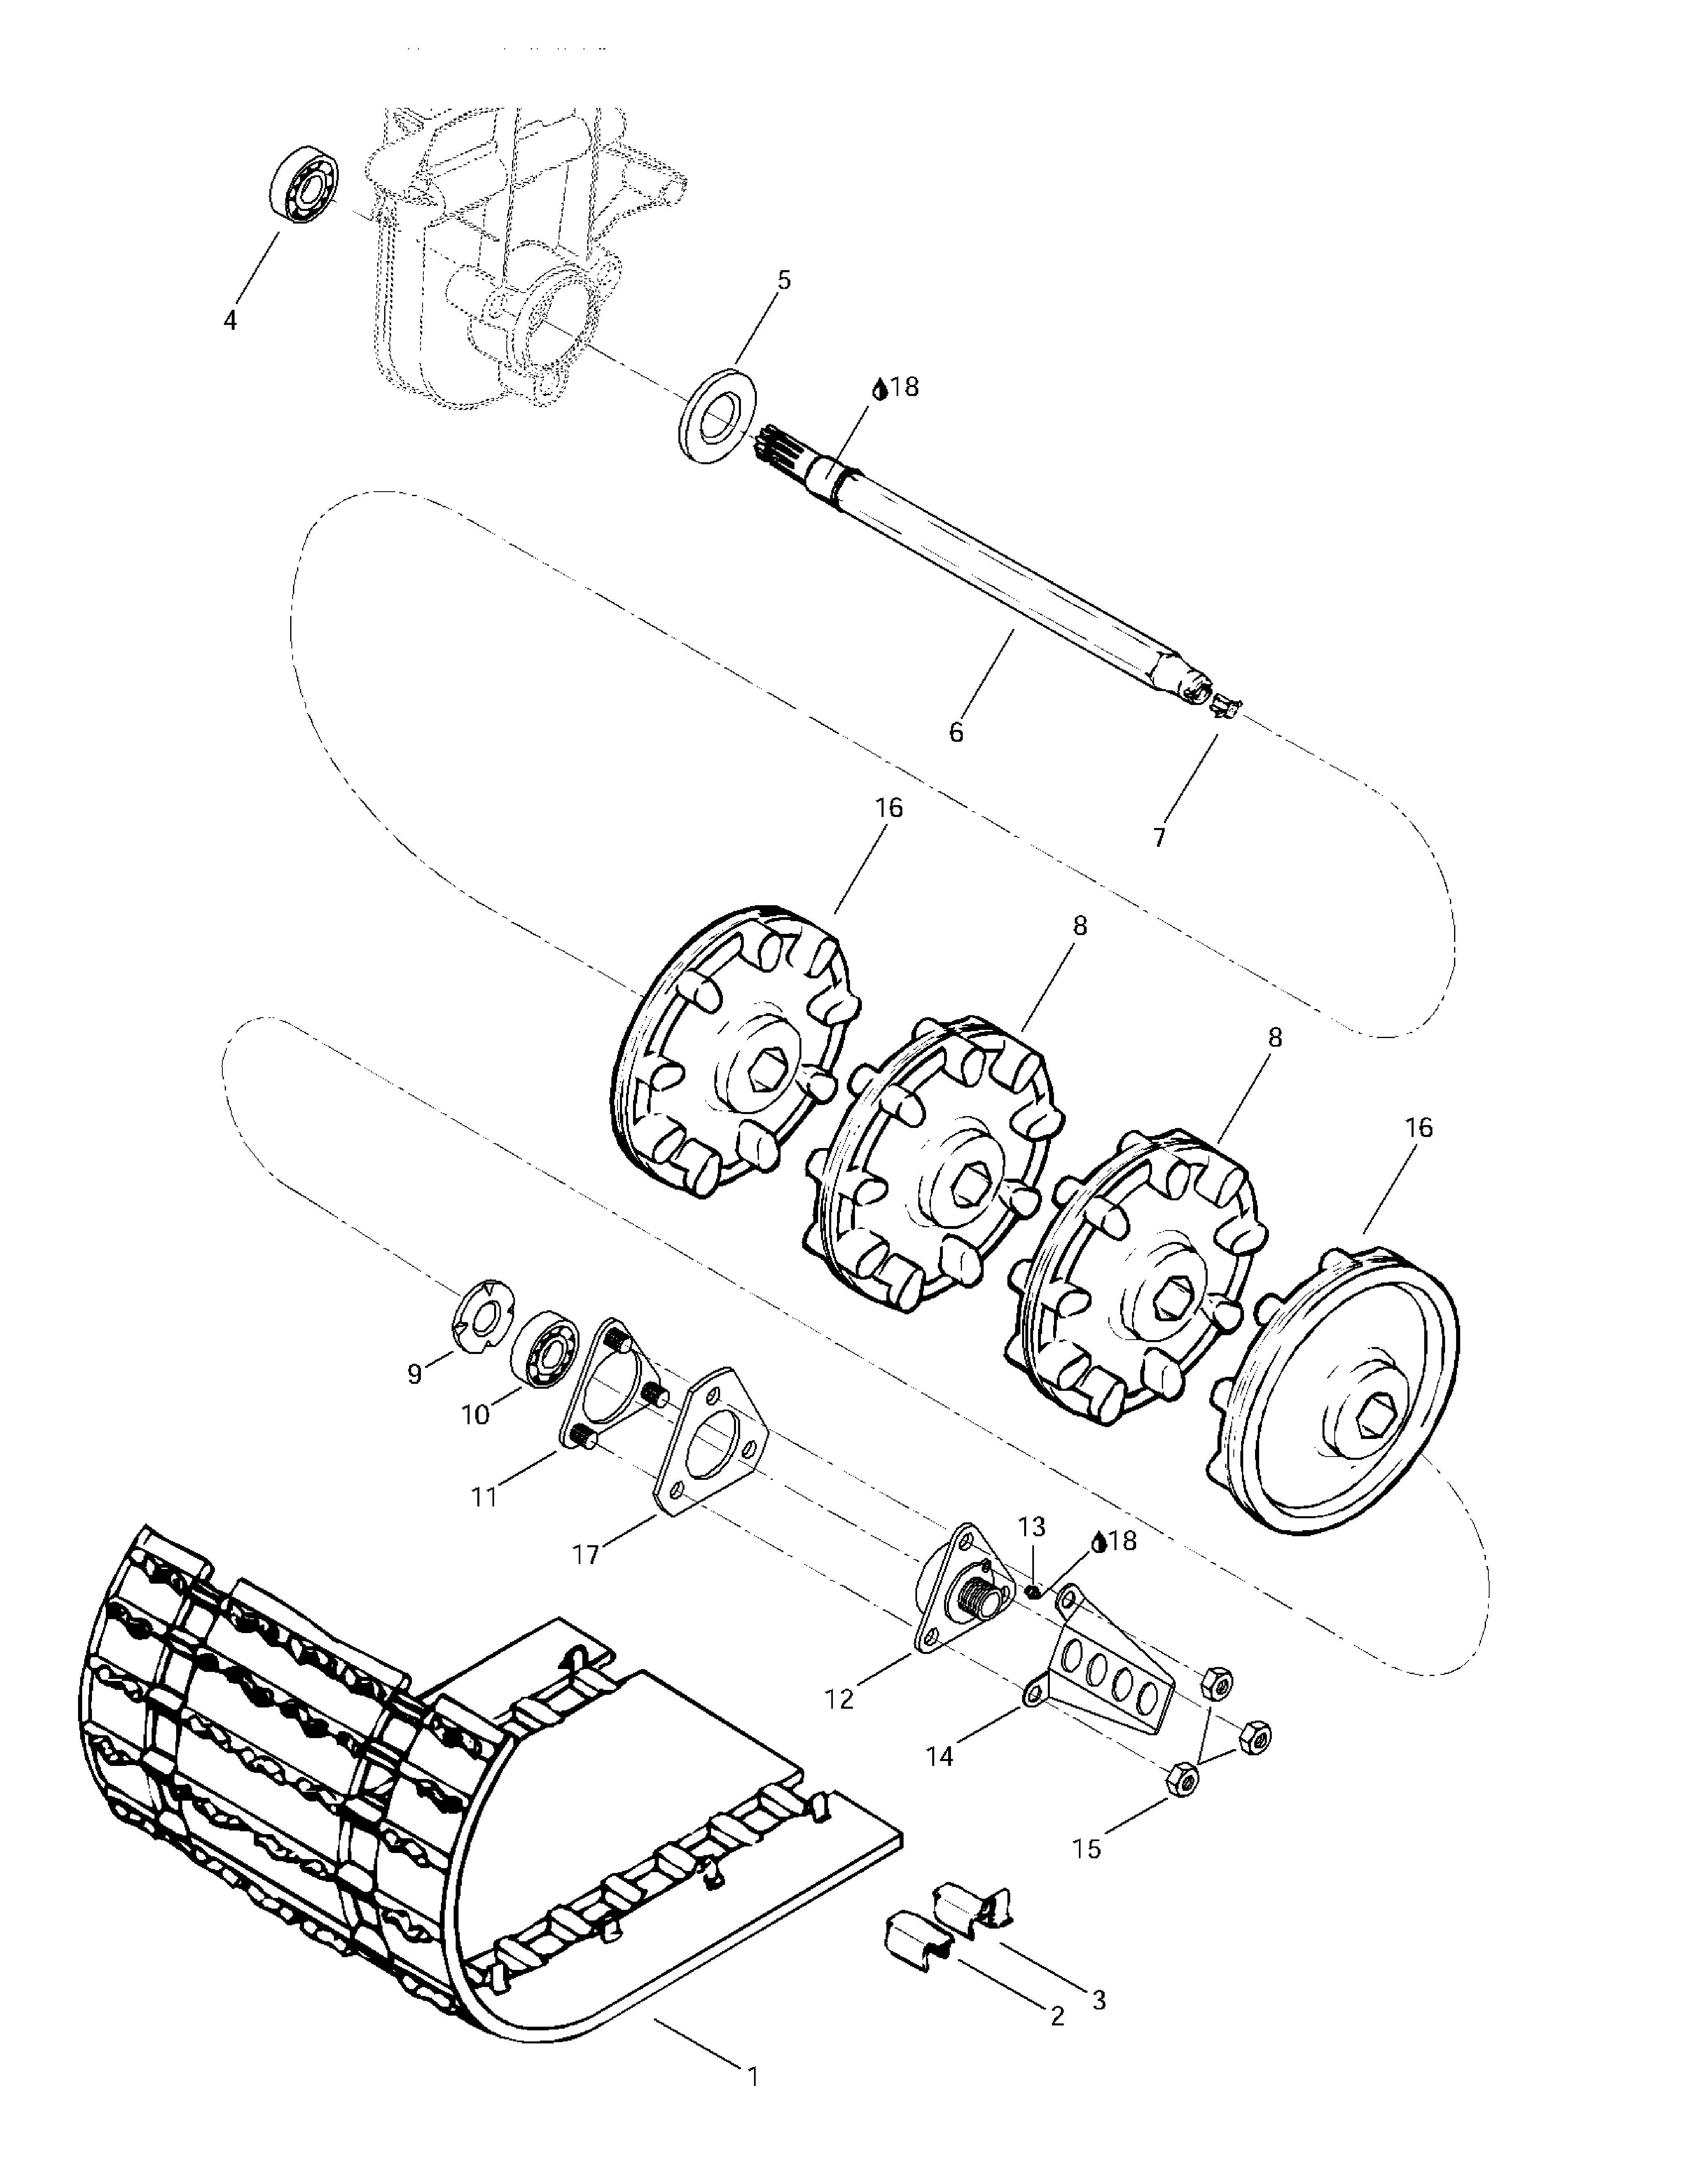 Drive axle and track